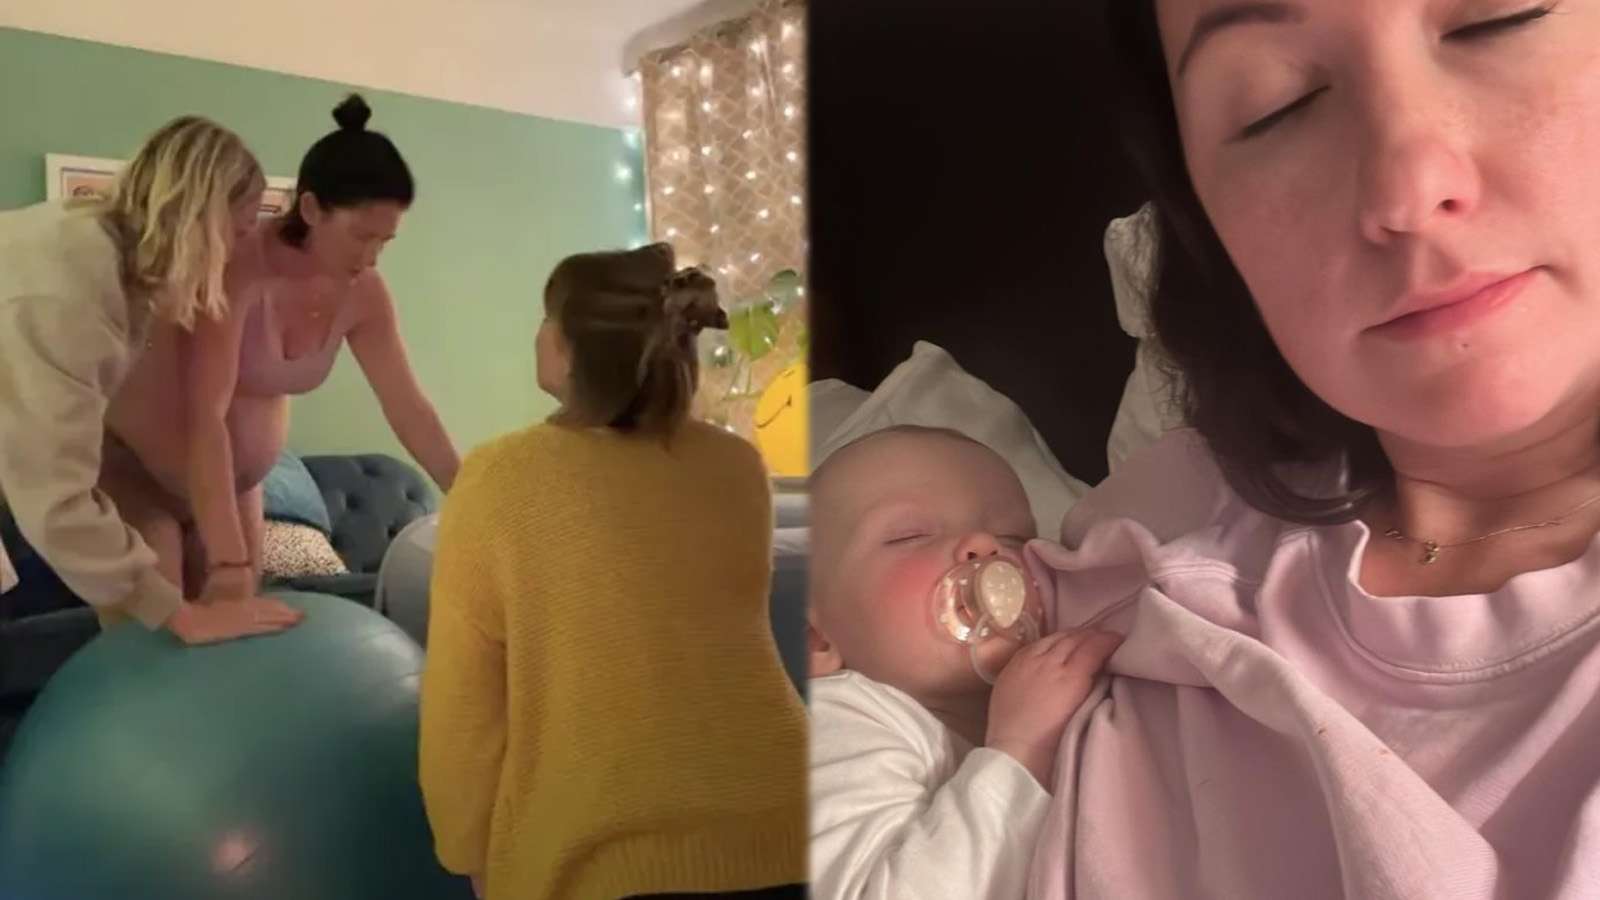 Woman streams daughter's birth to 45,000 viewers on YouTube to prove it's not gross